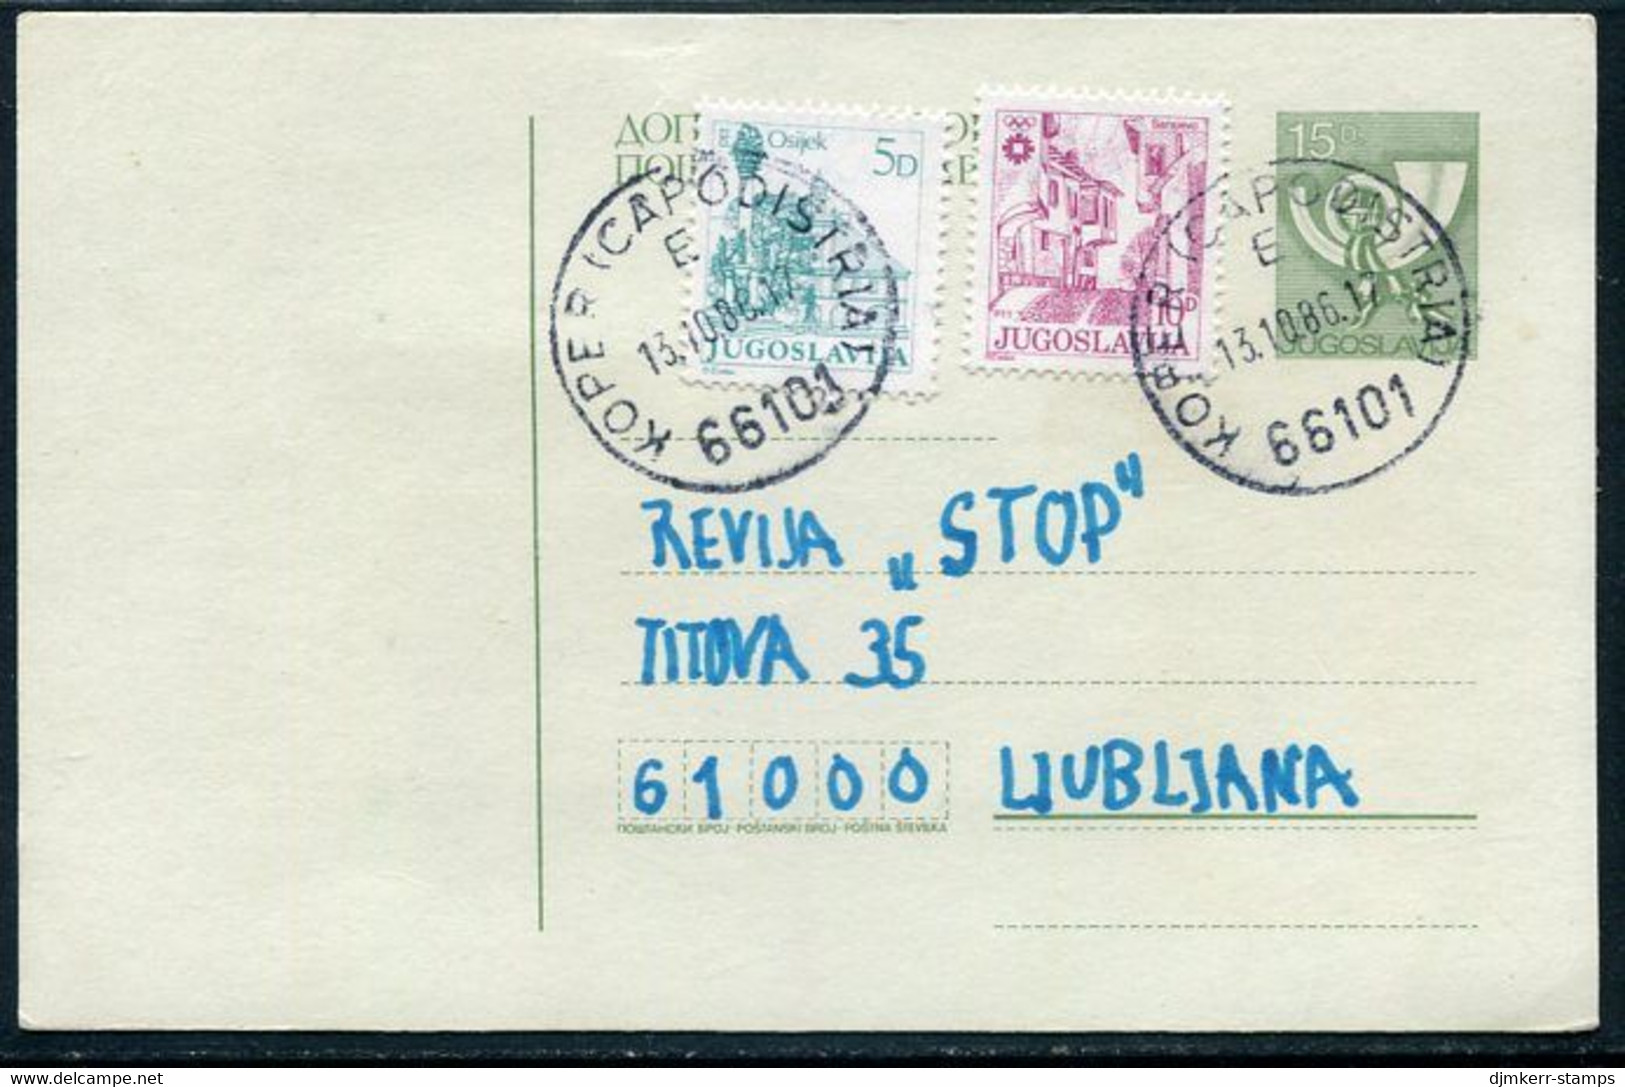 YUGOSLAVIA 1986 Posthorn 15 D. Stationery Card Used With Additional Franking.  Michel  P187 - Postal Stationery